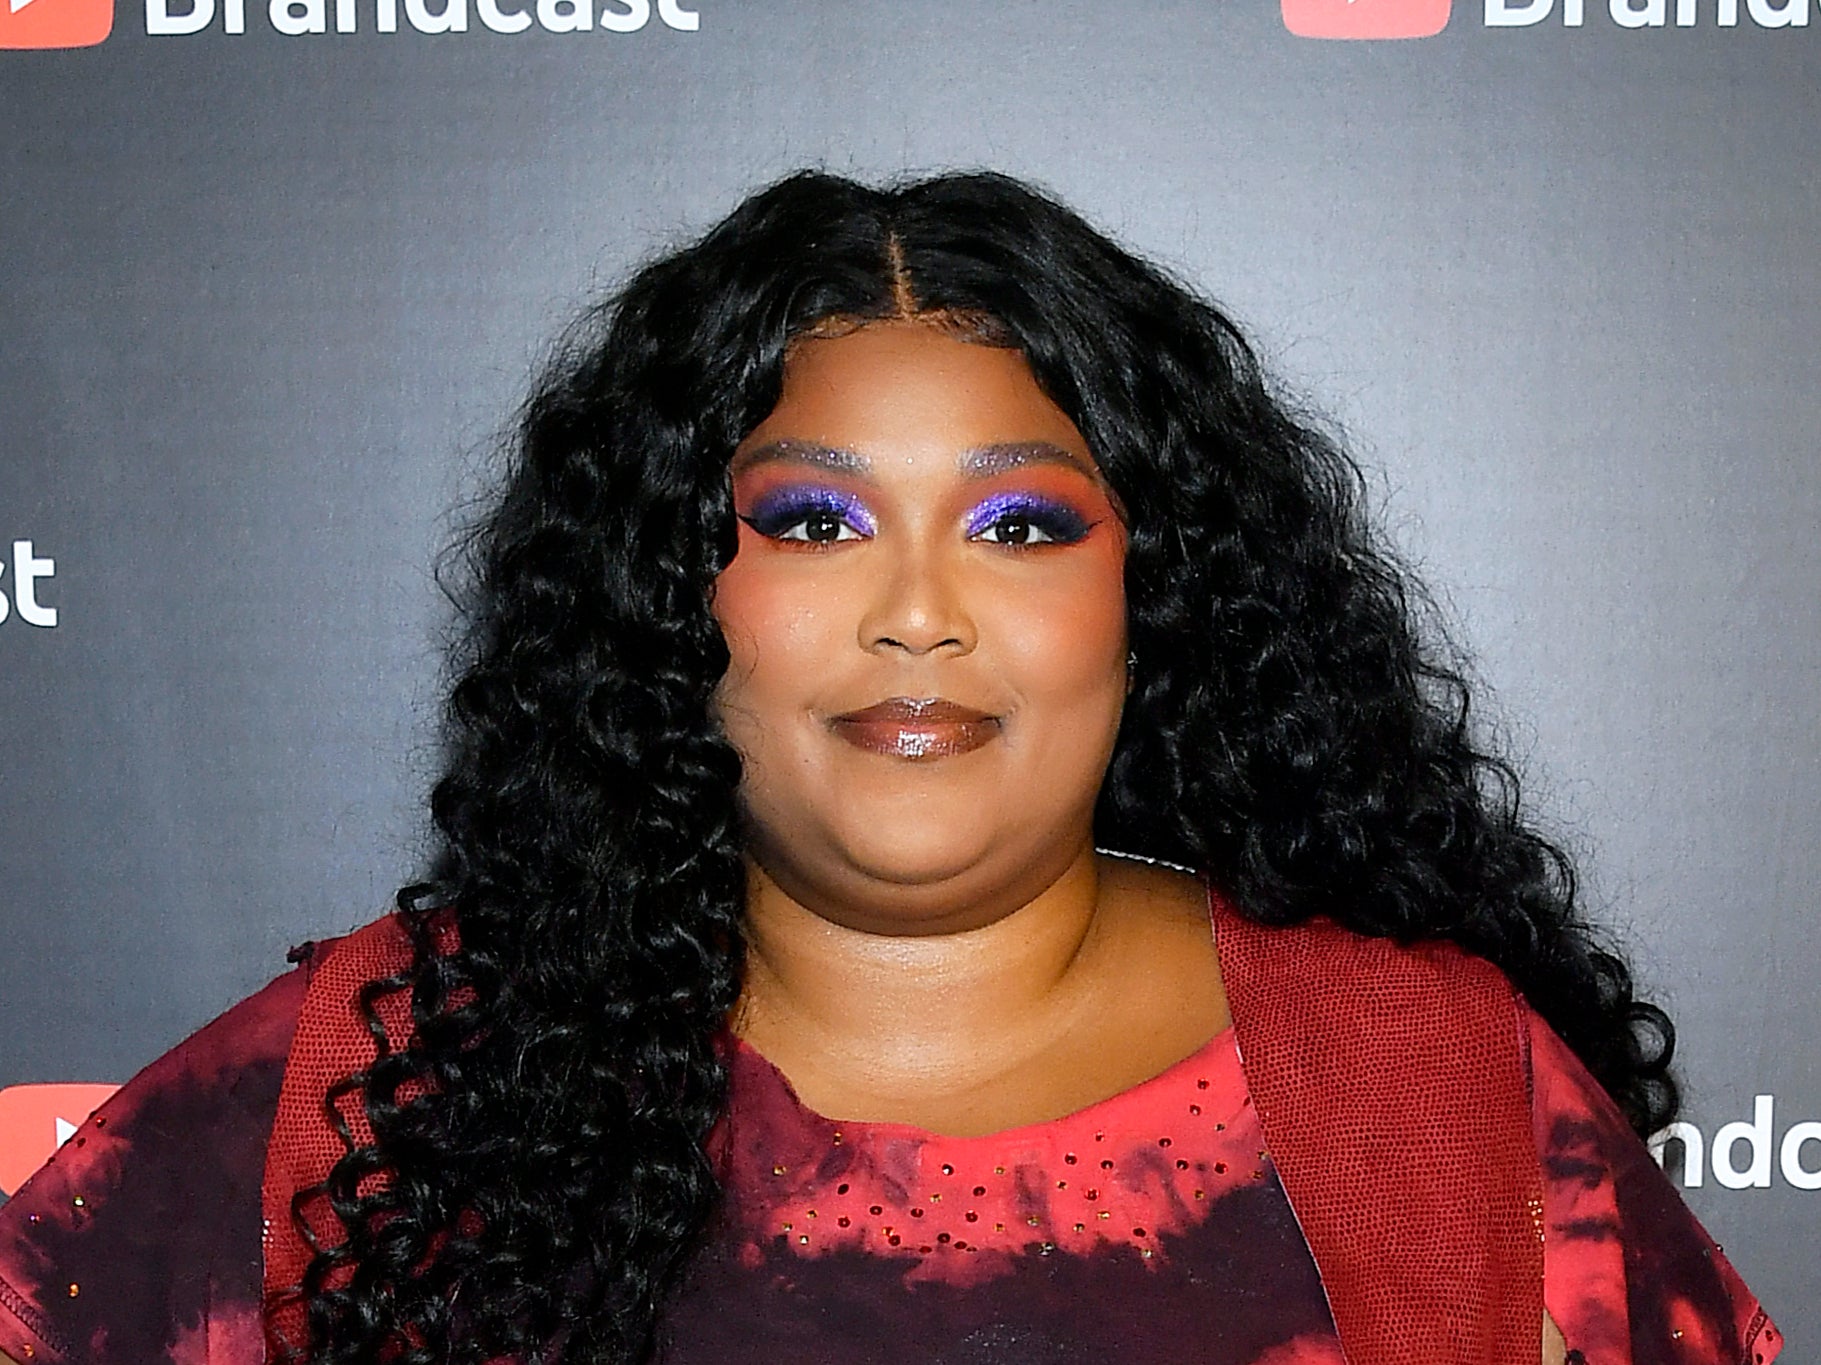 Lizzo didn’t issue some half-arsed non apology